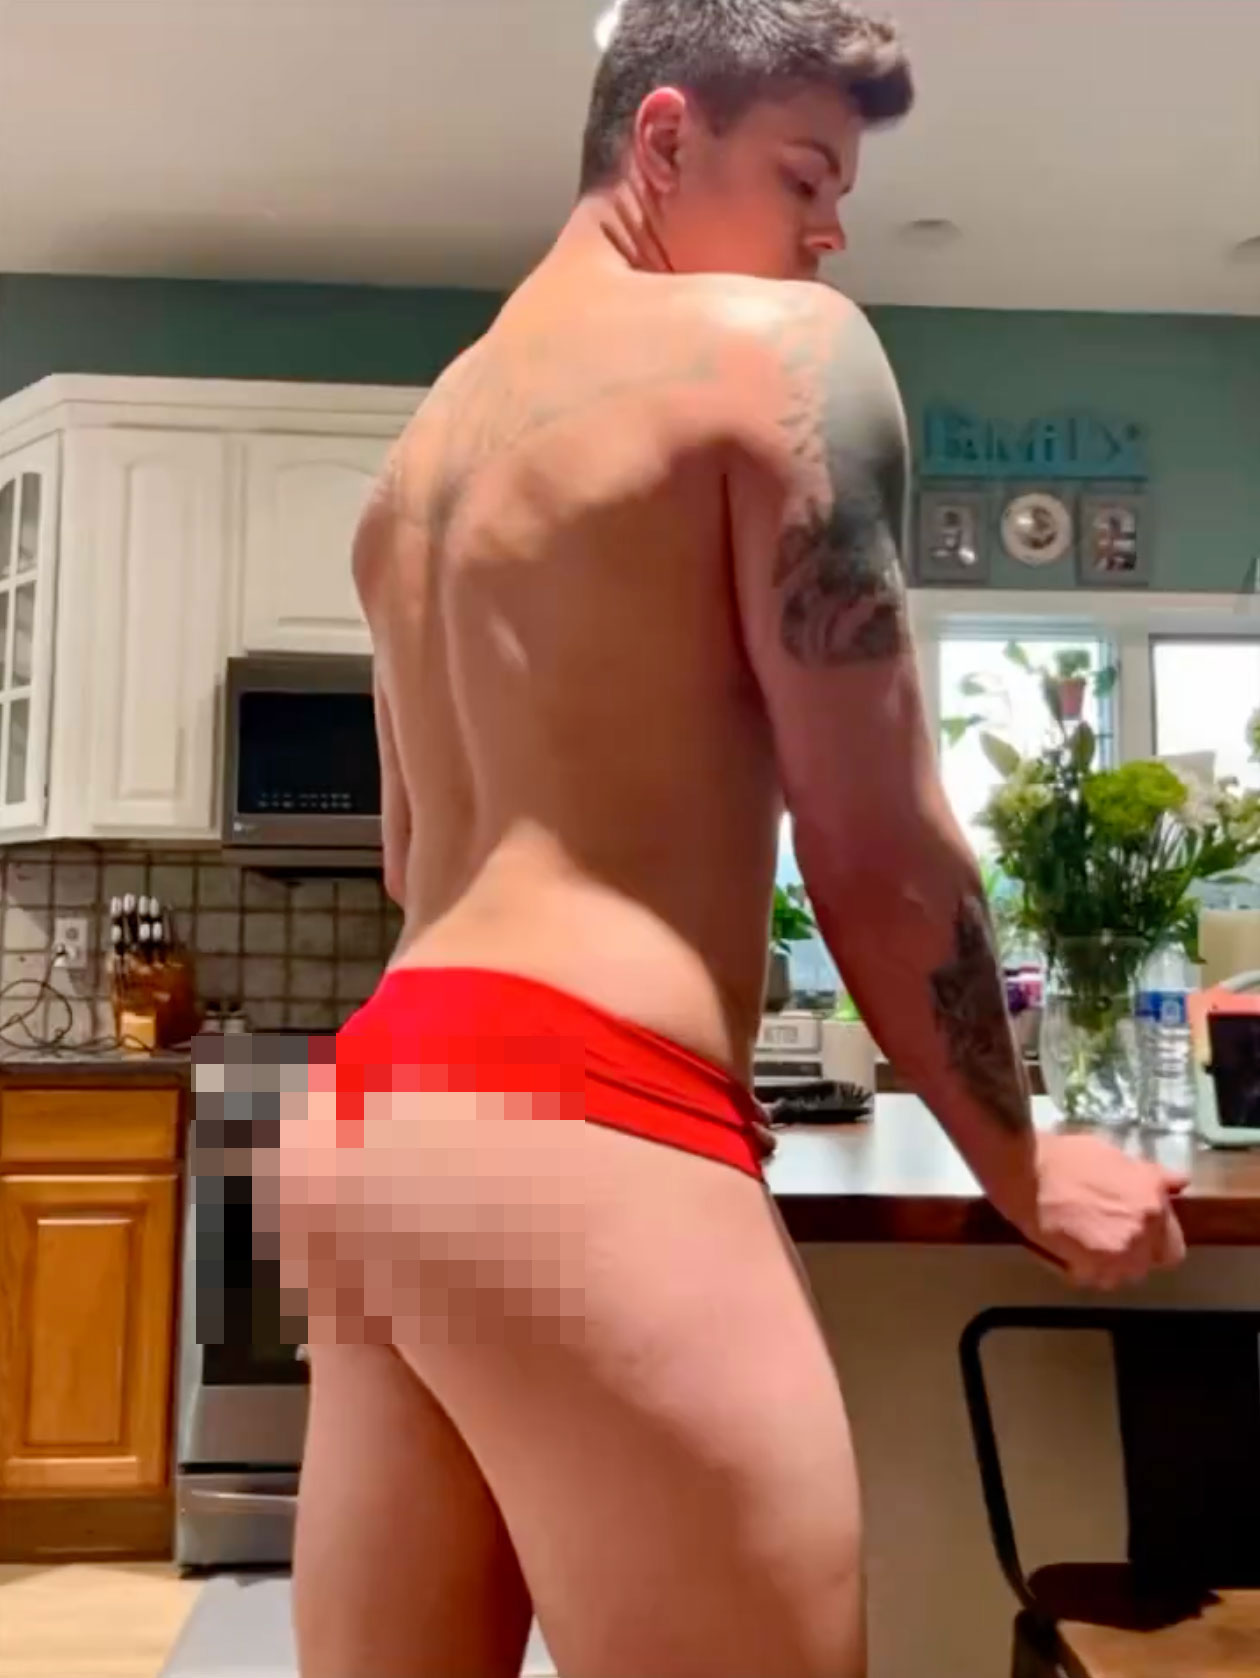 The Teen Mom star reshared a compilation video from his wife Catelynn that showed him posing in revealing underwear while shirtless